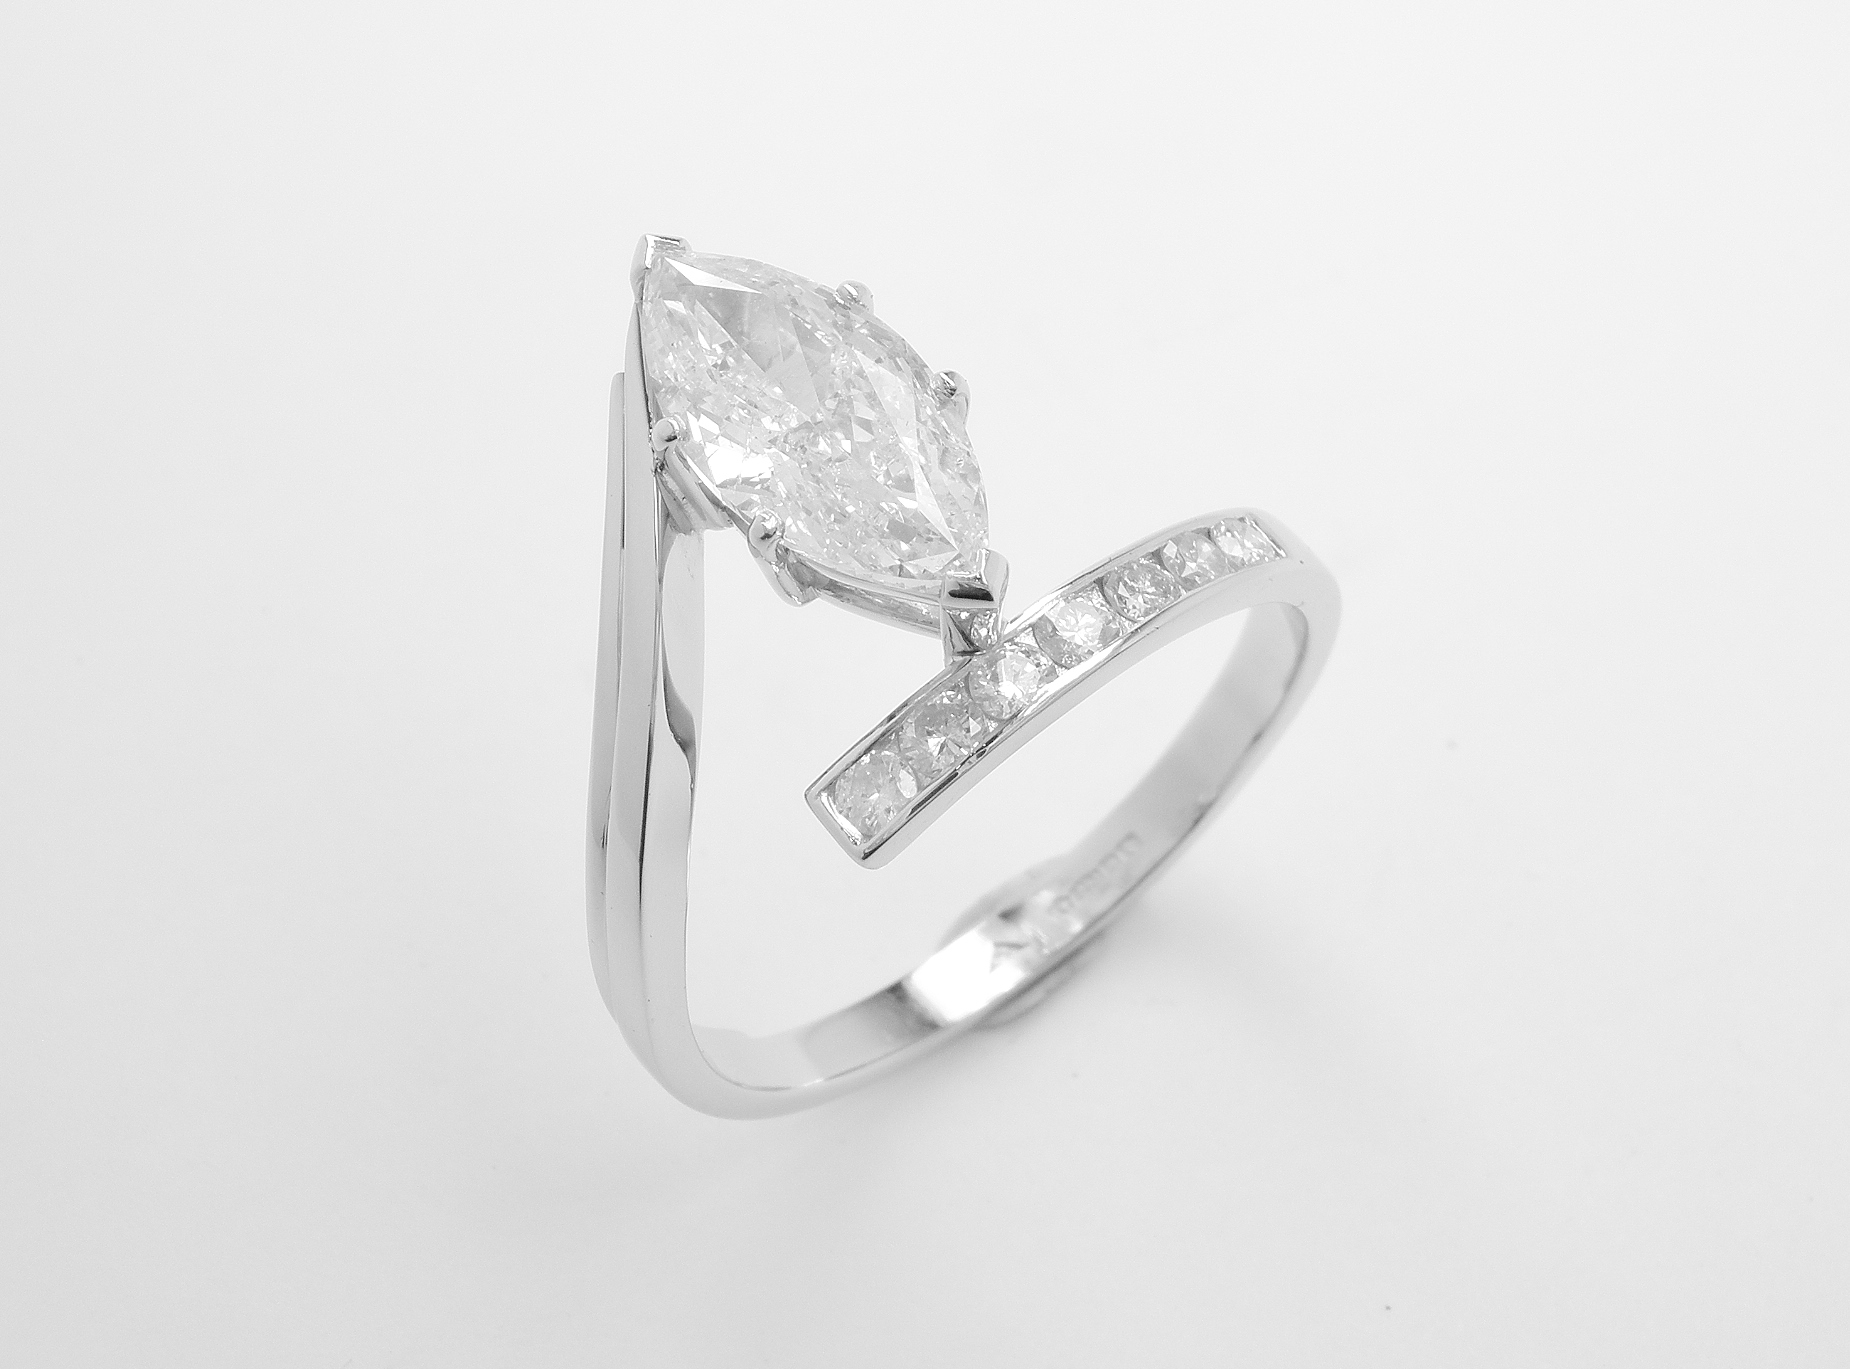 A 1.71ct. 'F' colour, SI clarity, marquise straight wishbone cross-over style ring mounted in platinum with 7 round brilliant cut diamonds channel set in the straight shoulder.